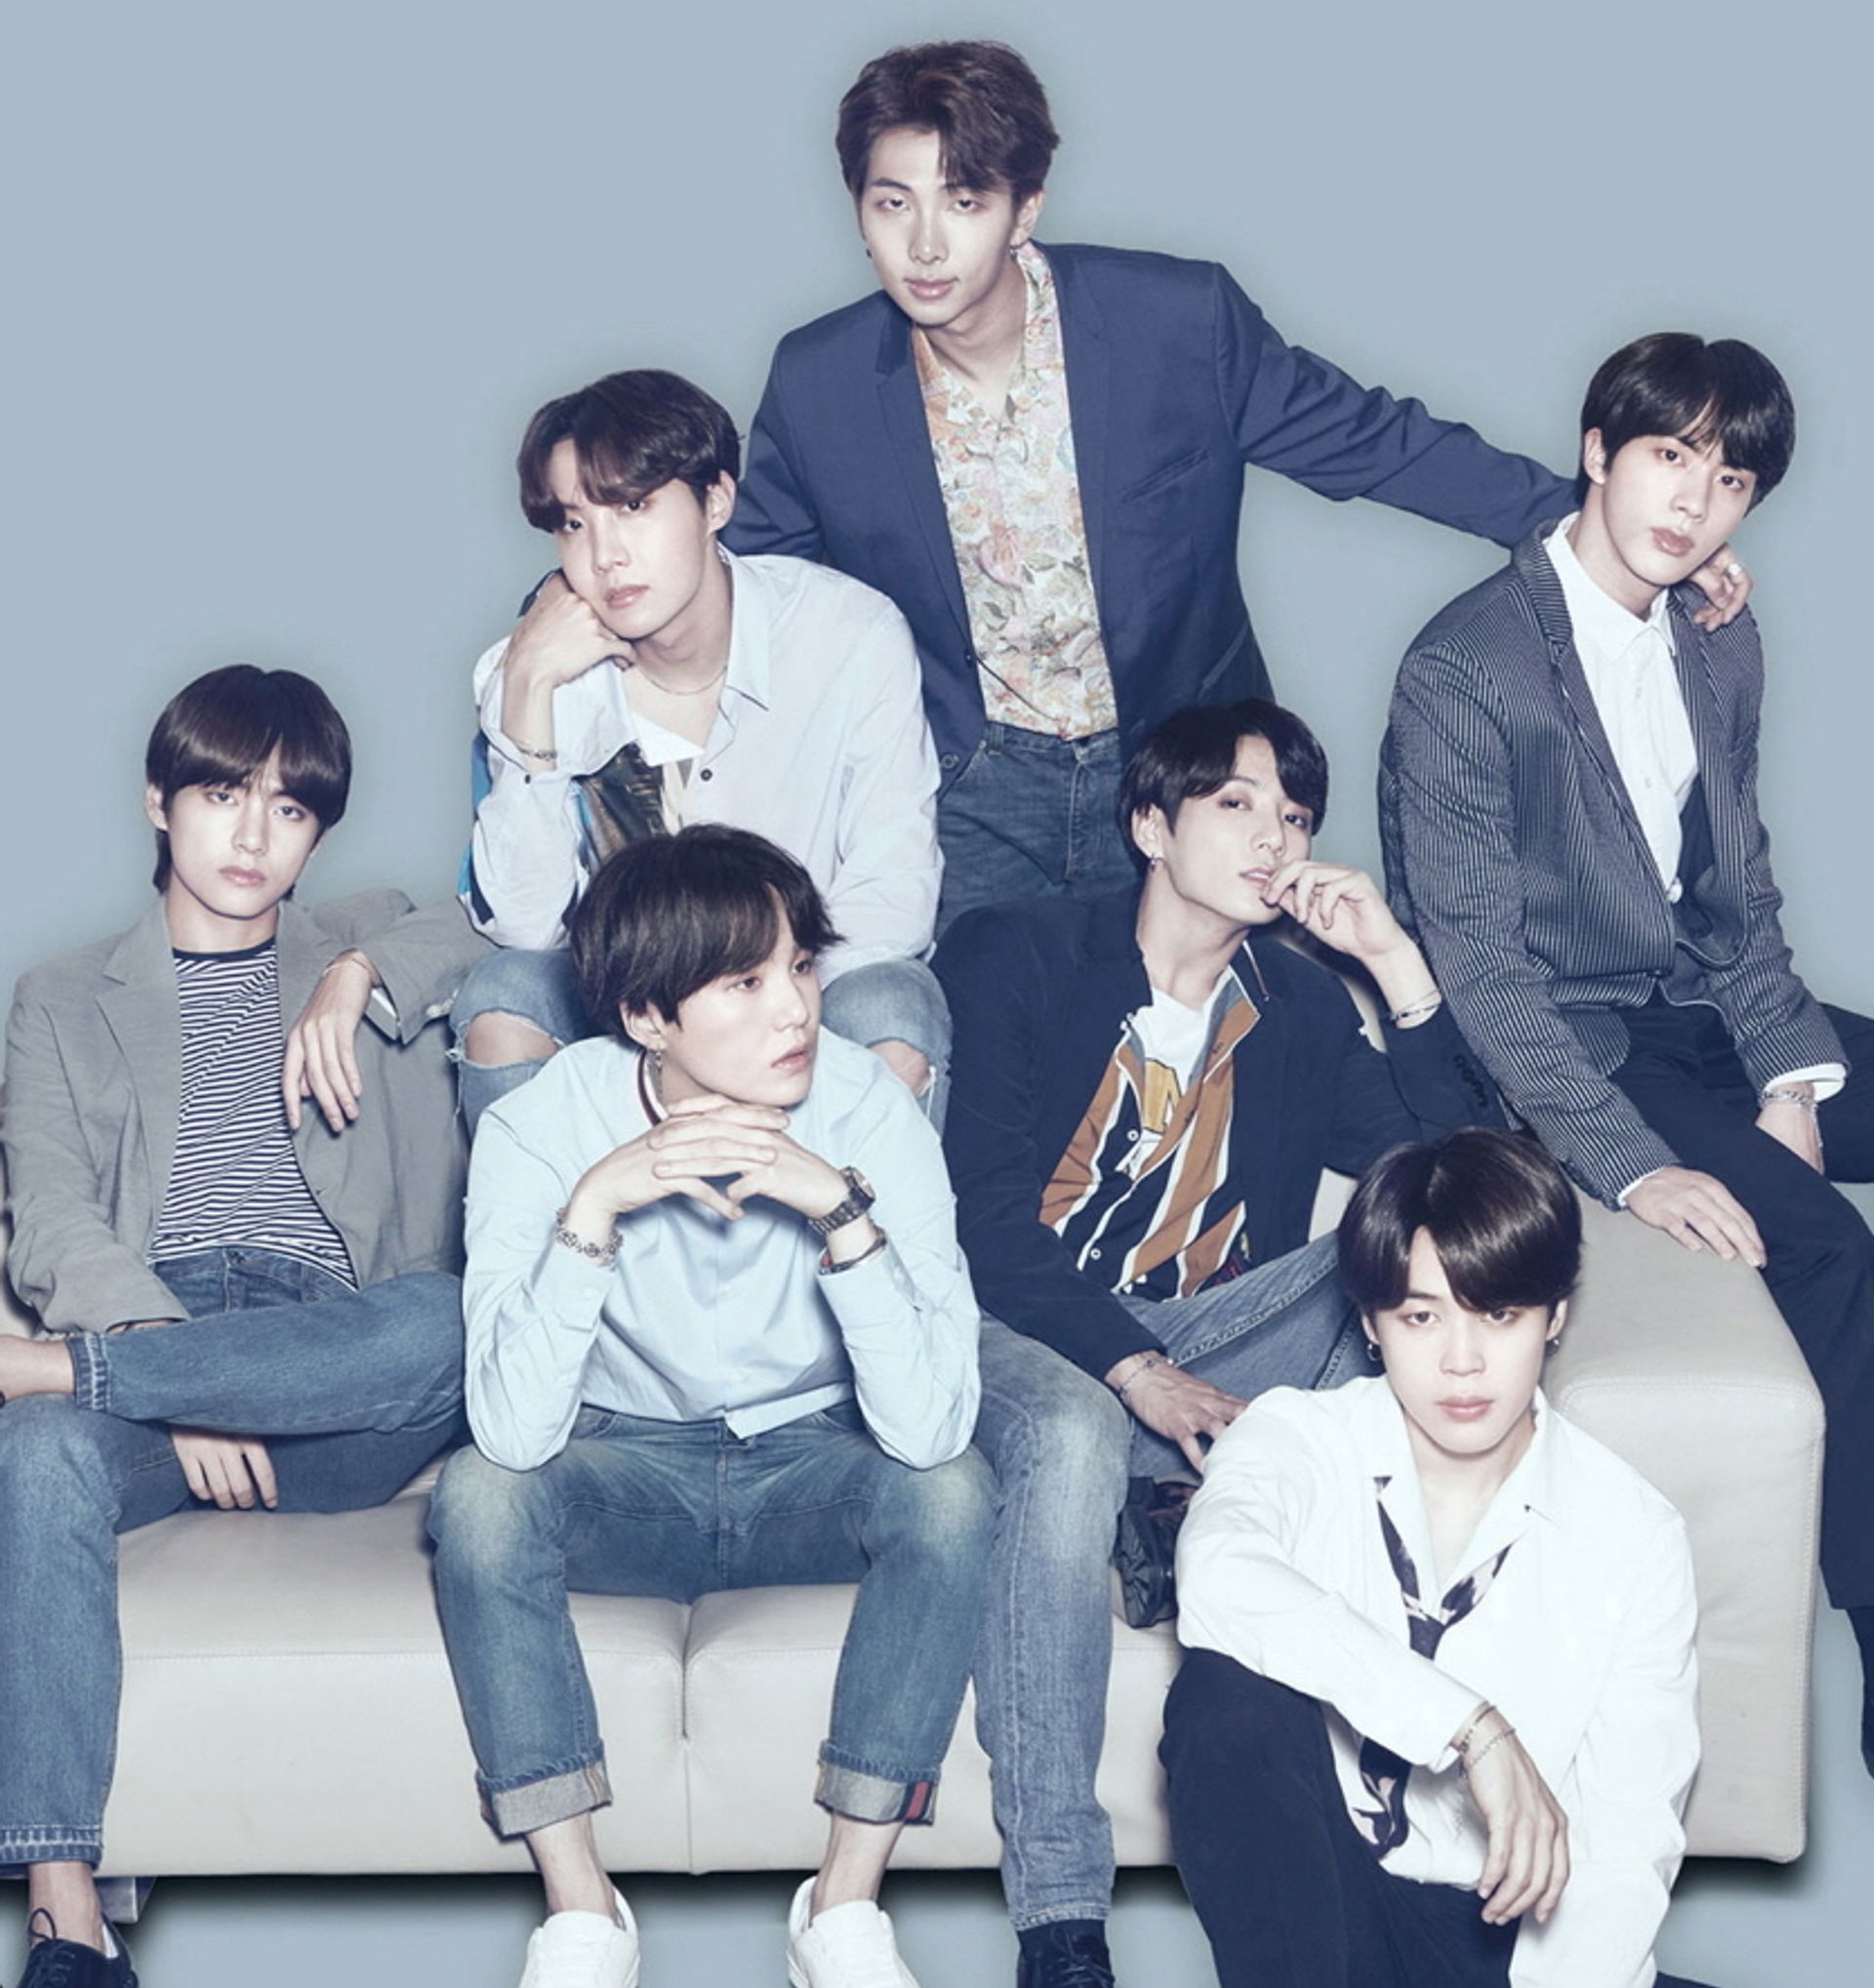 BTS, a septet from South Korea, are one of the world's most successful musical acts © LG Q7 BTS 에디션’ 예약 판매 시작